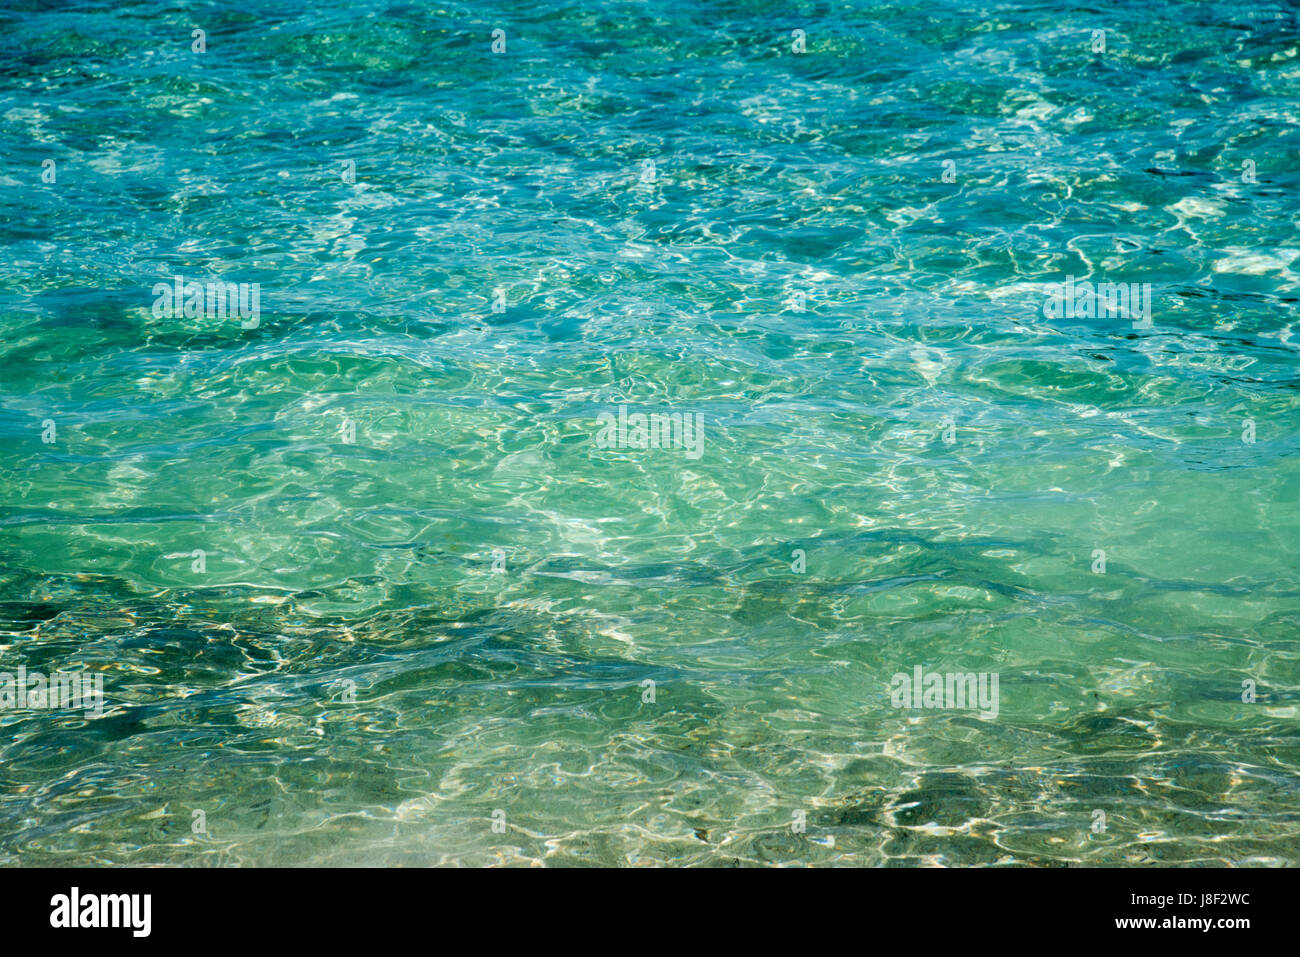 Full frame close up of the pure turquoise-green Indian Ocean waters at Coogee Beach in Coogee, Western Australia. Stock Photo